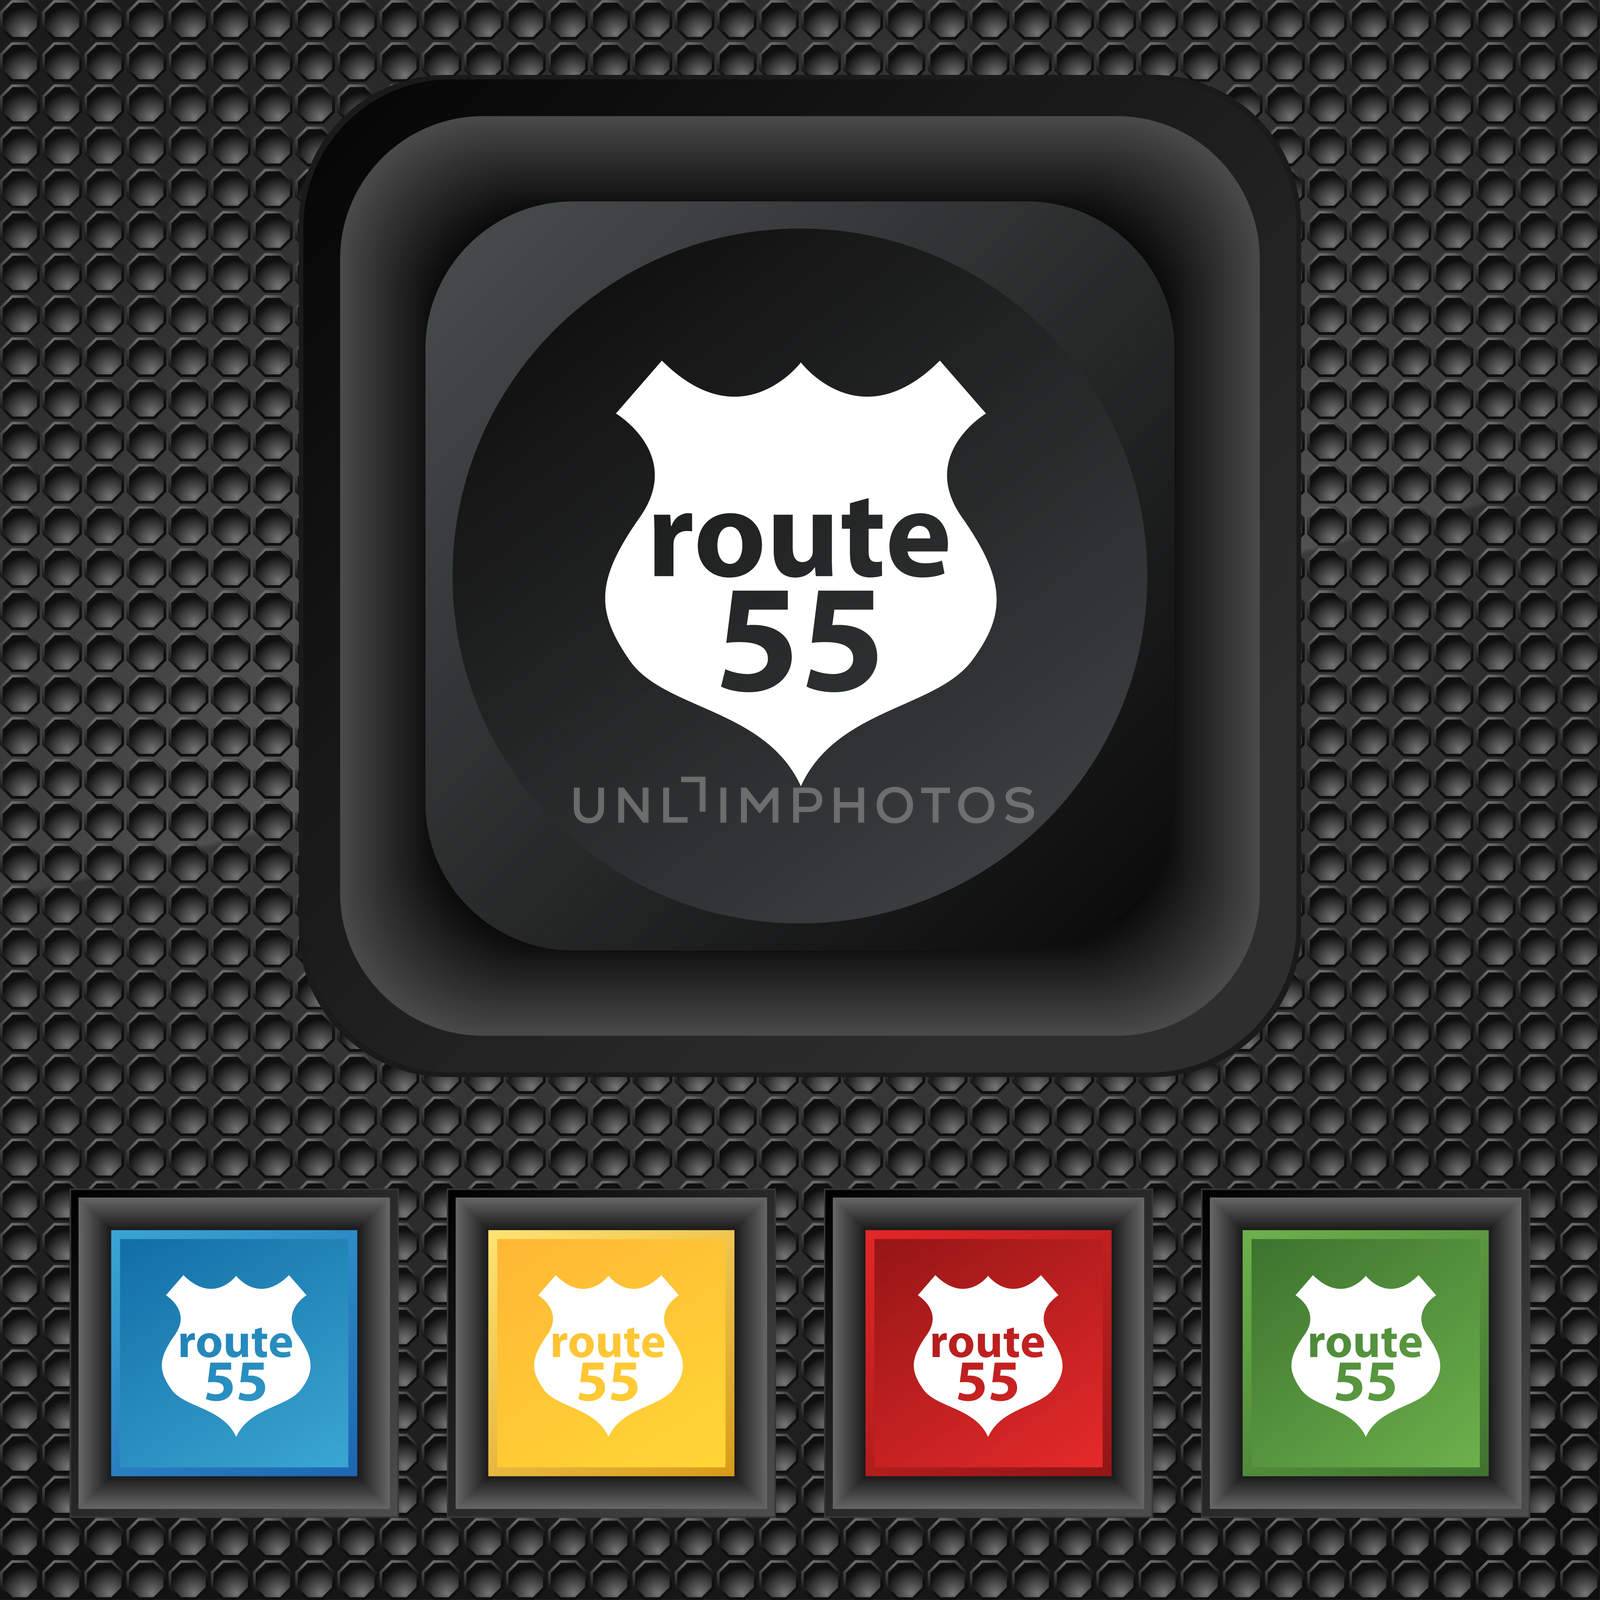 Route 55 highway icon sign. symbol Squared colourful buttons on black texture. illustration